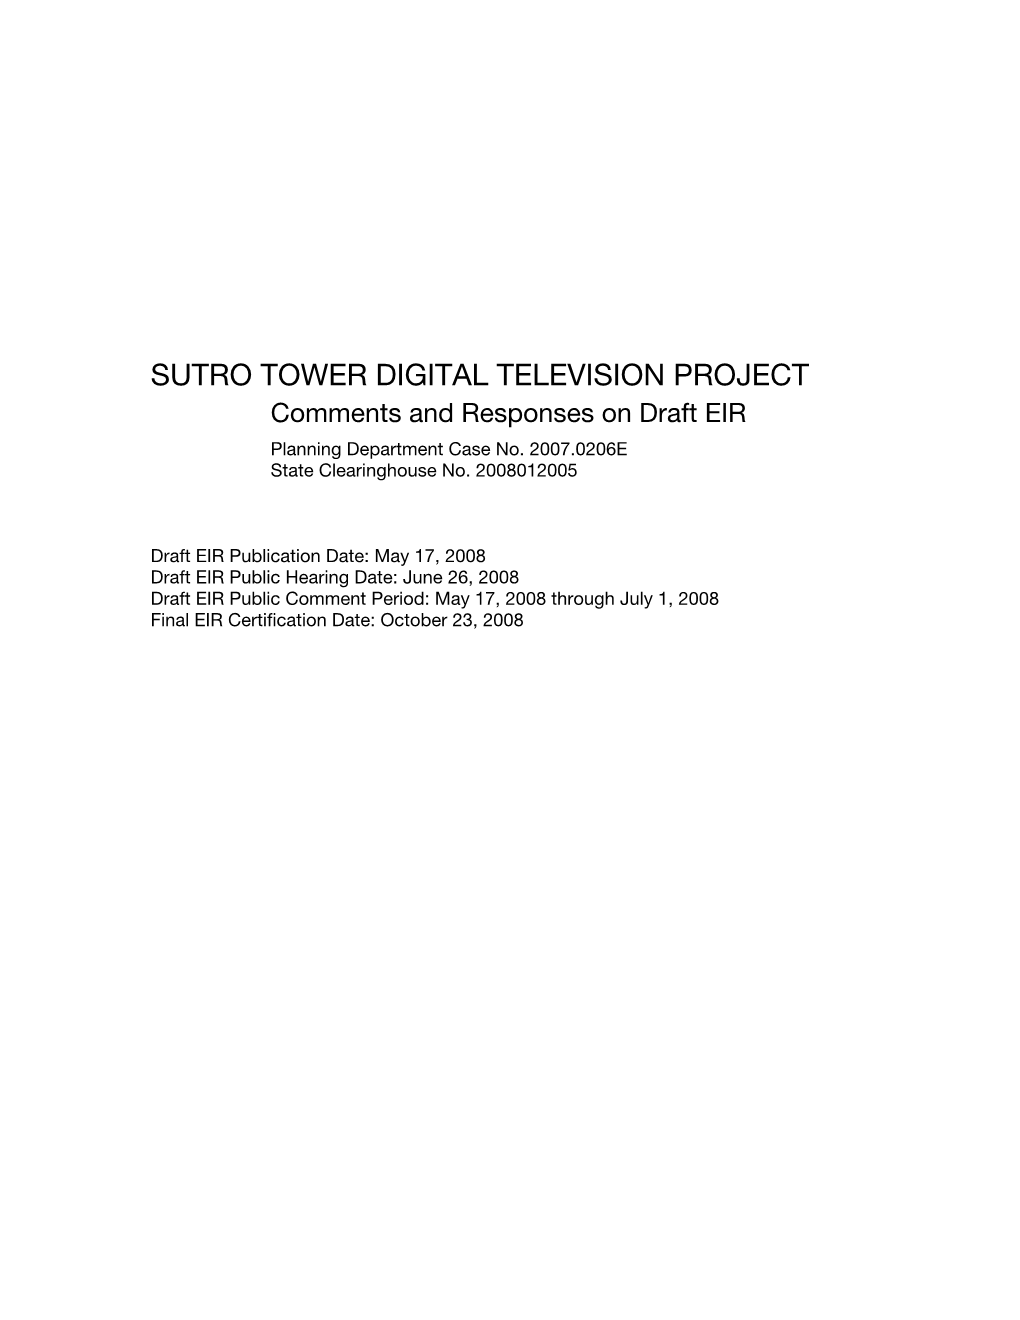 SUTRO TOWER DIGITAL TELEVISION PROJECT Comments and Responses on Draft EIR Planning Department Case No